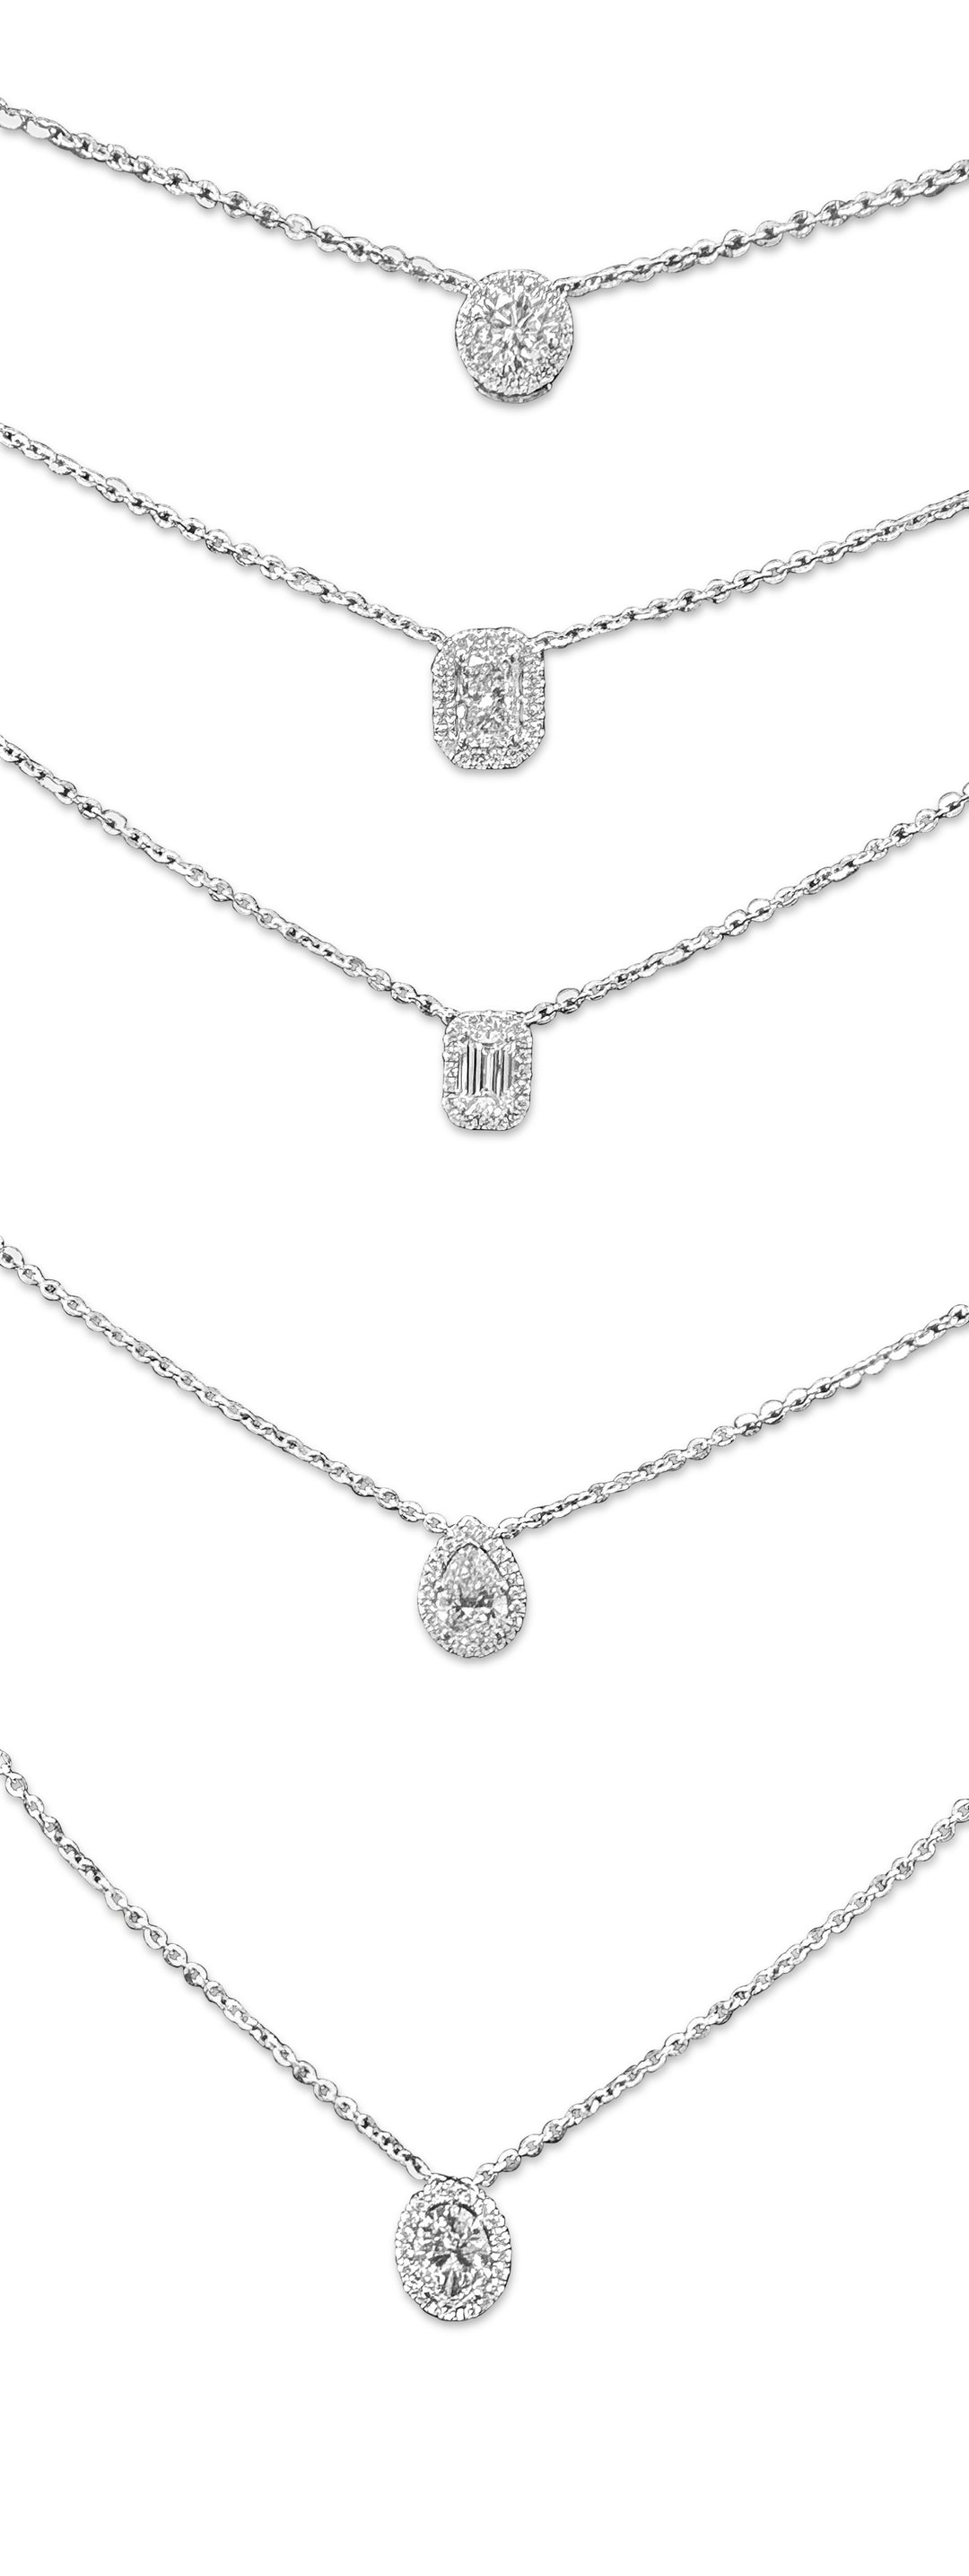 Selection of Lab-Grown Diamond Halo Necklaces Available